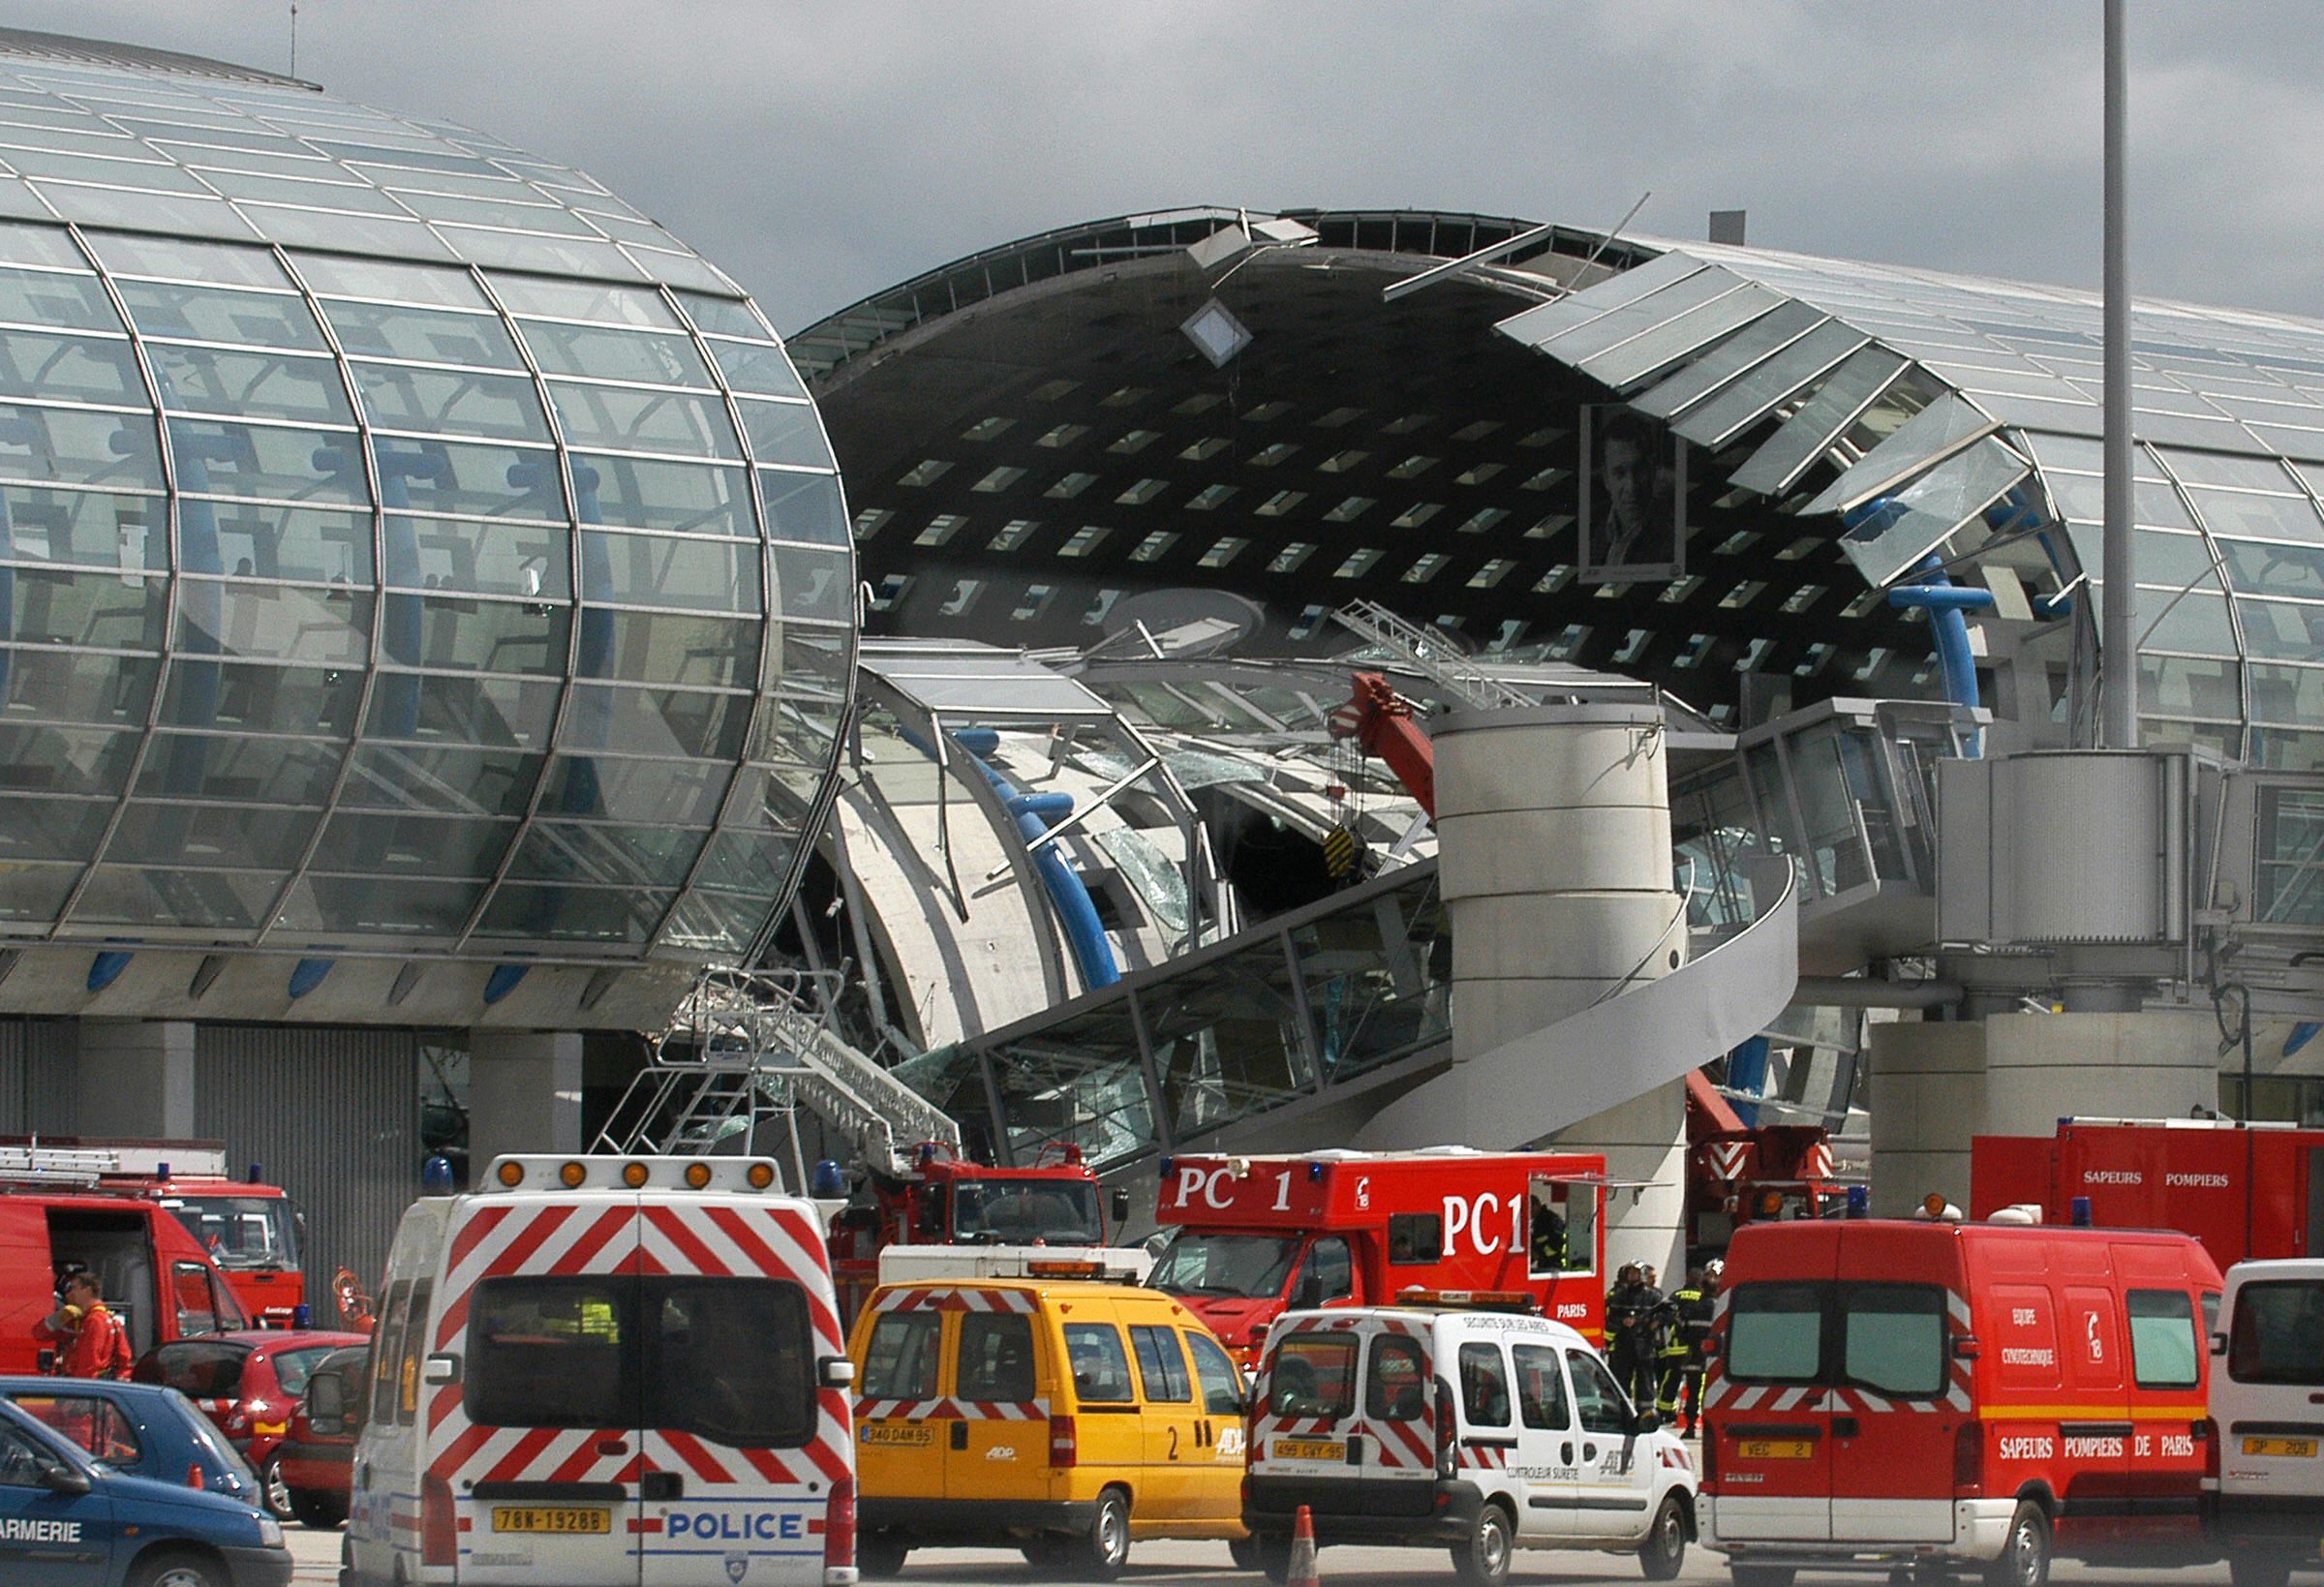 The 2004 Collapse Of Charles De Gaulle Airport's Terminal 2E